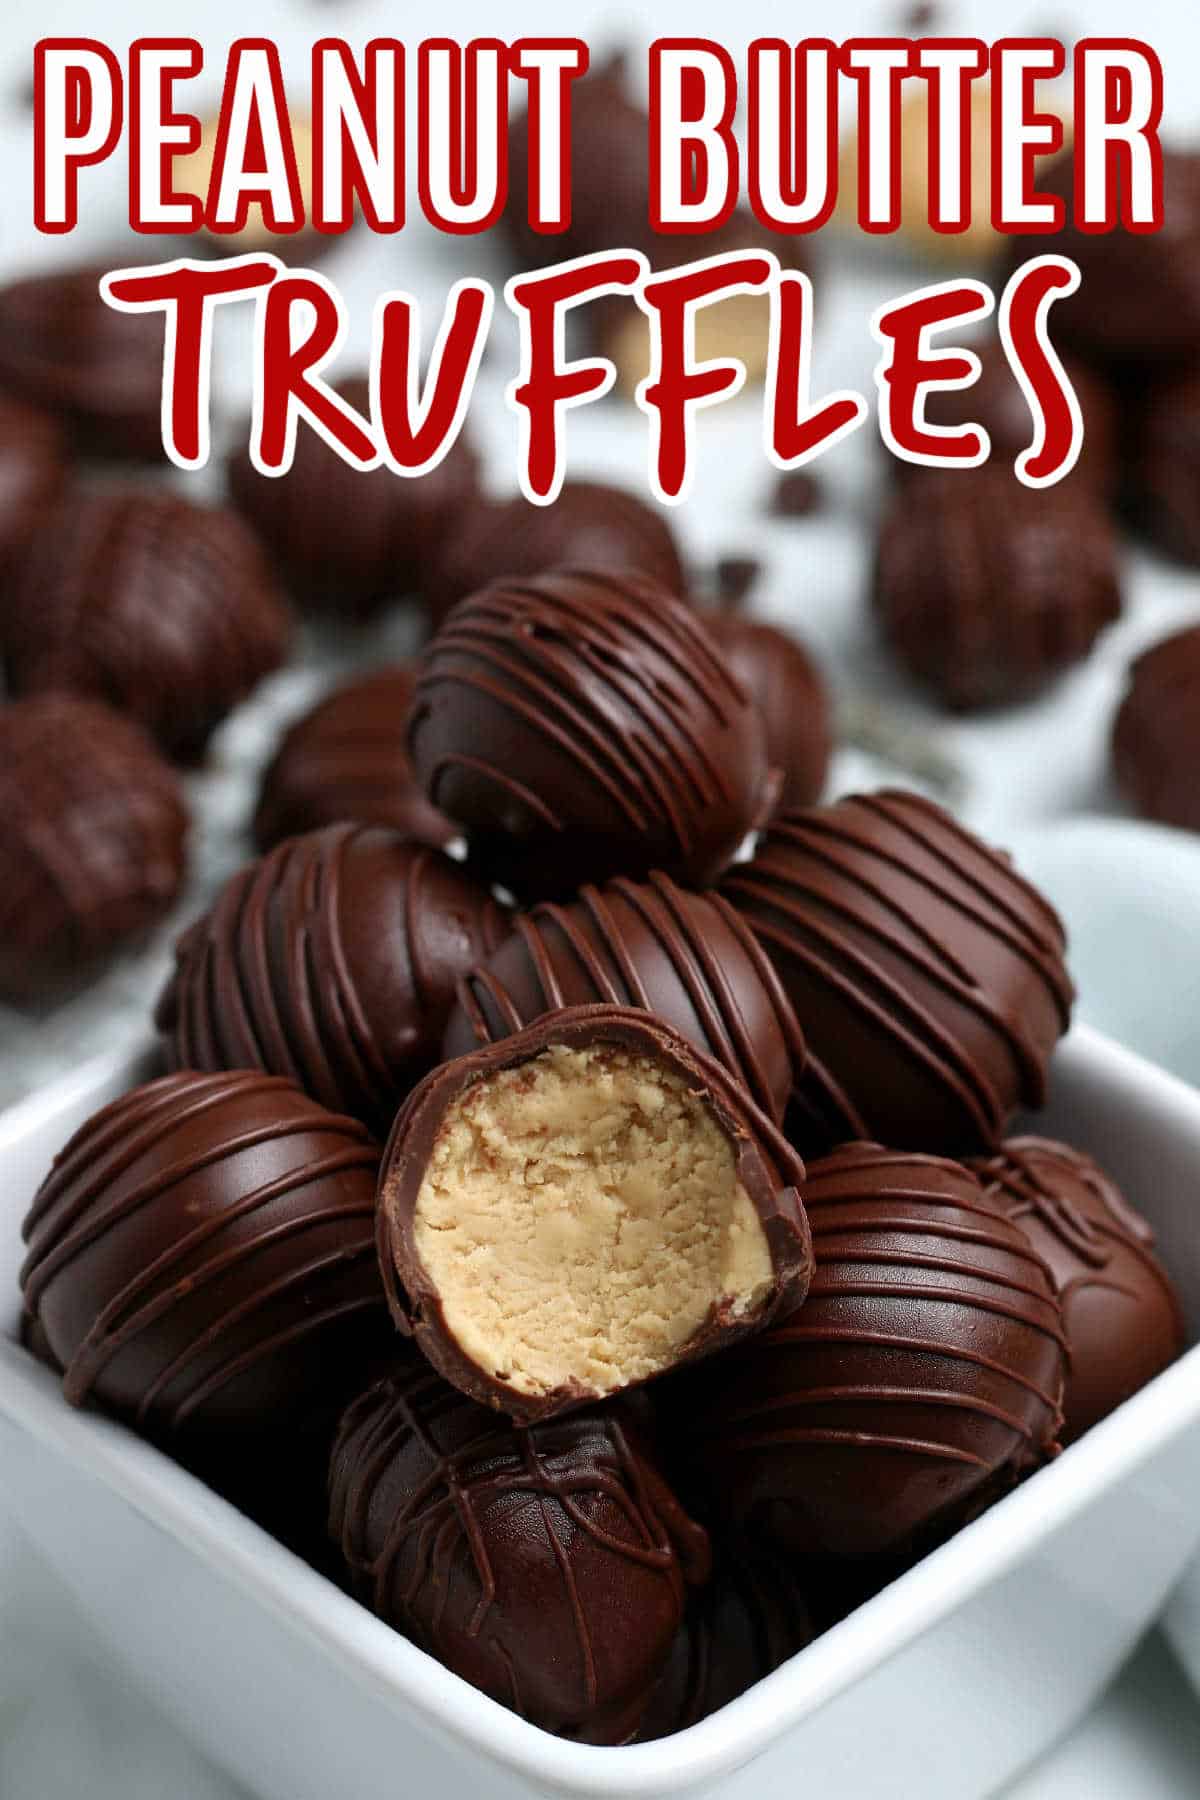 Close up photo of peanut butter truffles with a bite out of the front one.